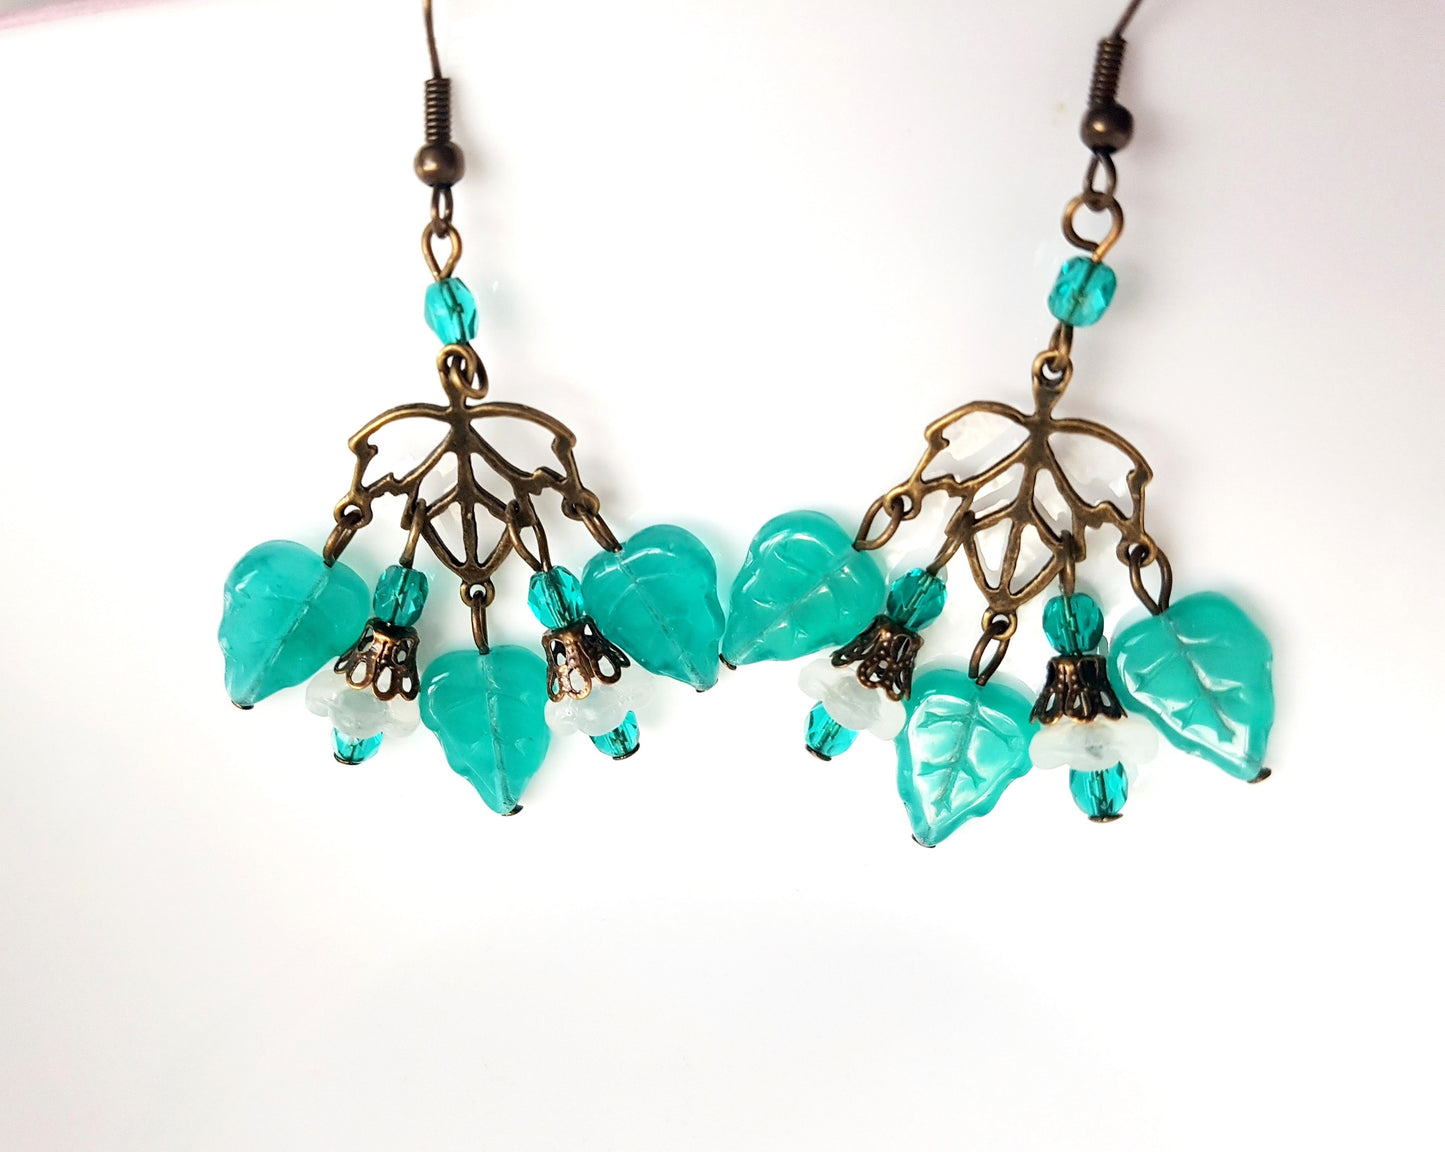 Vintage Style Leaf Chandelier Earrings, Glass Breen leaves and little white flowers on Antique Brass / Bronze color metal